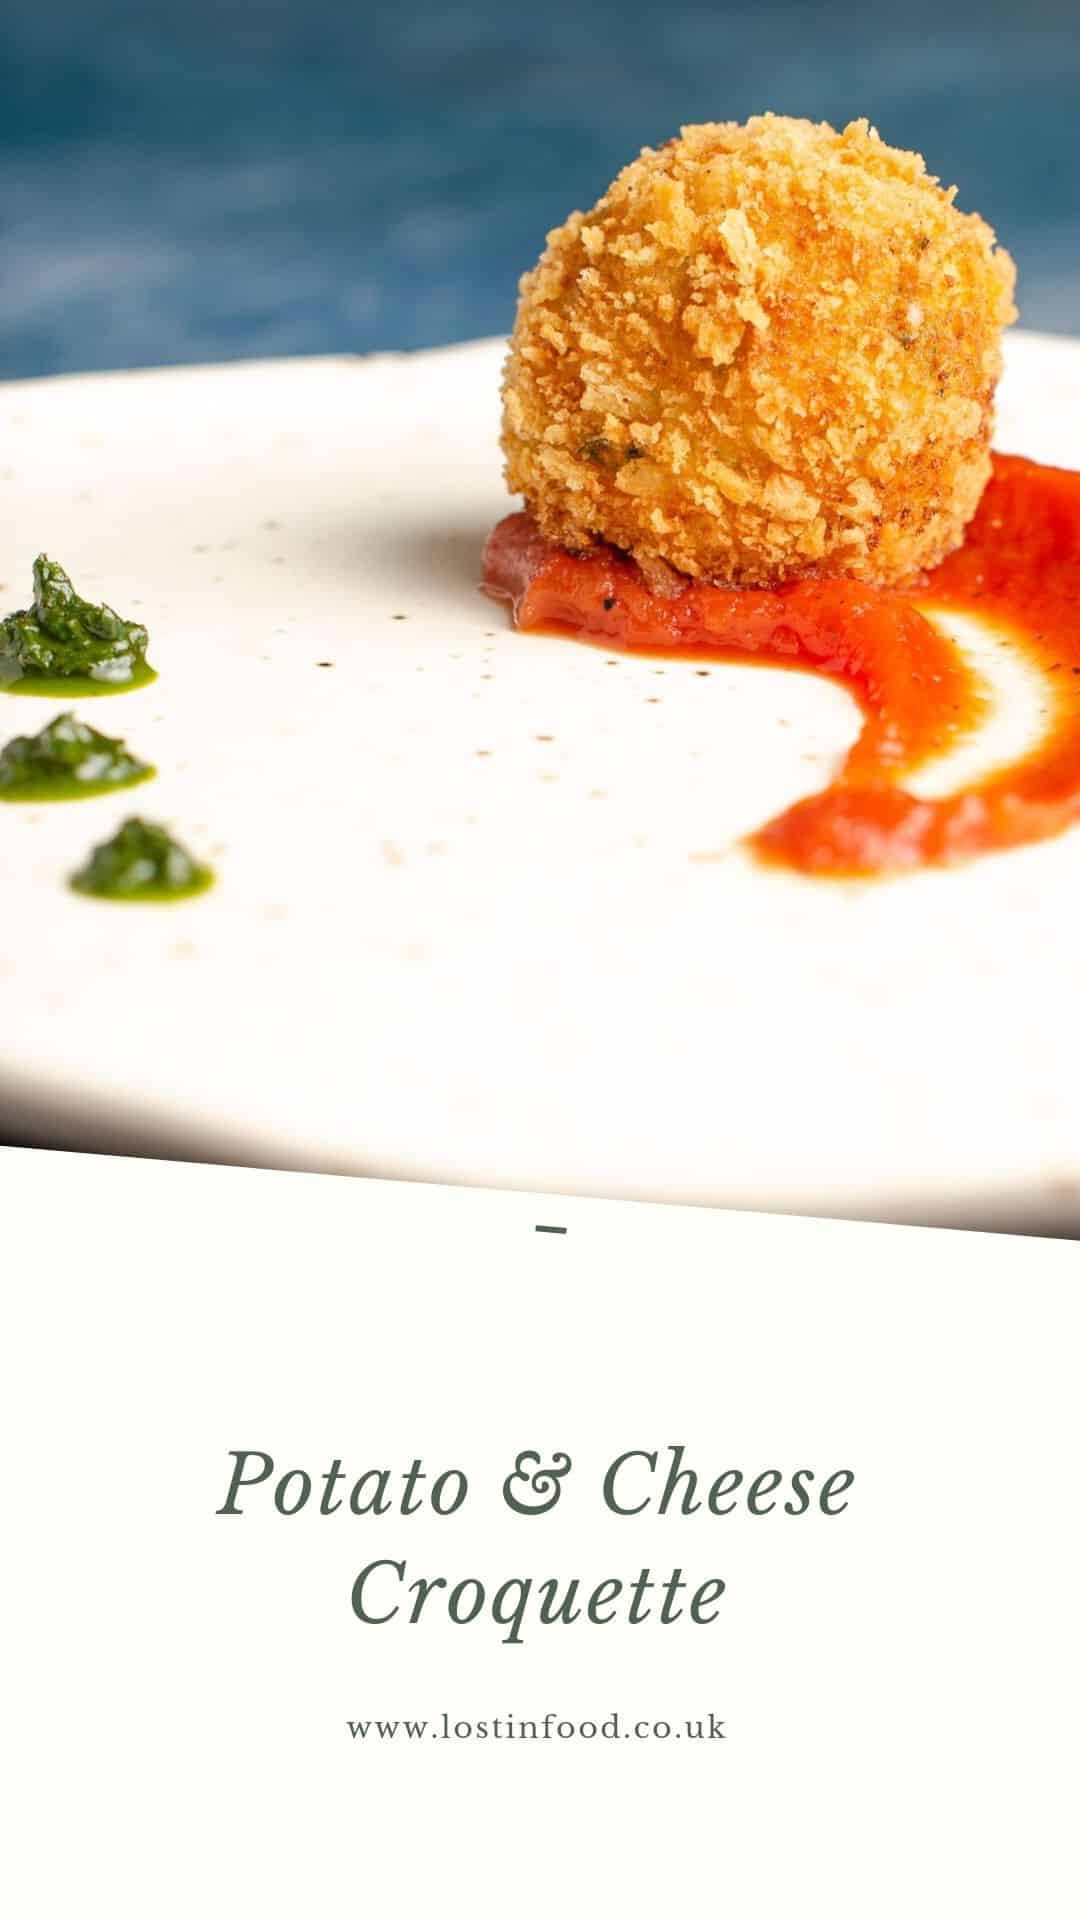 A crumbed potato and cheese croquette served with a swirl of rich tomato sauce.